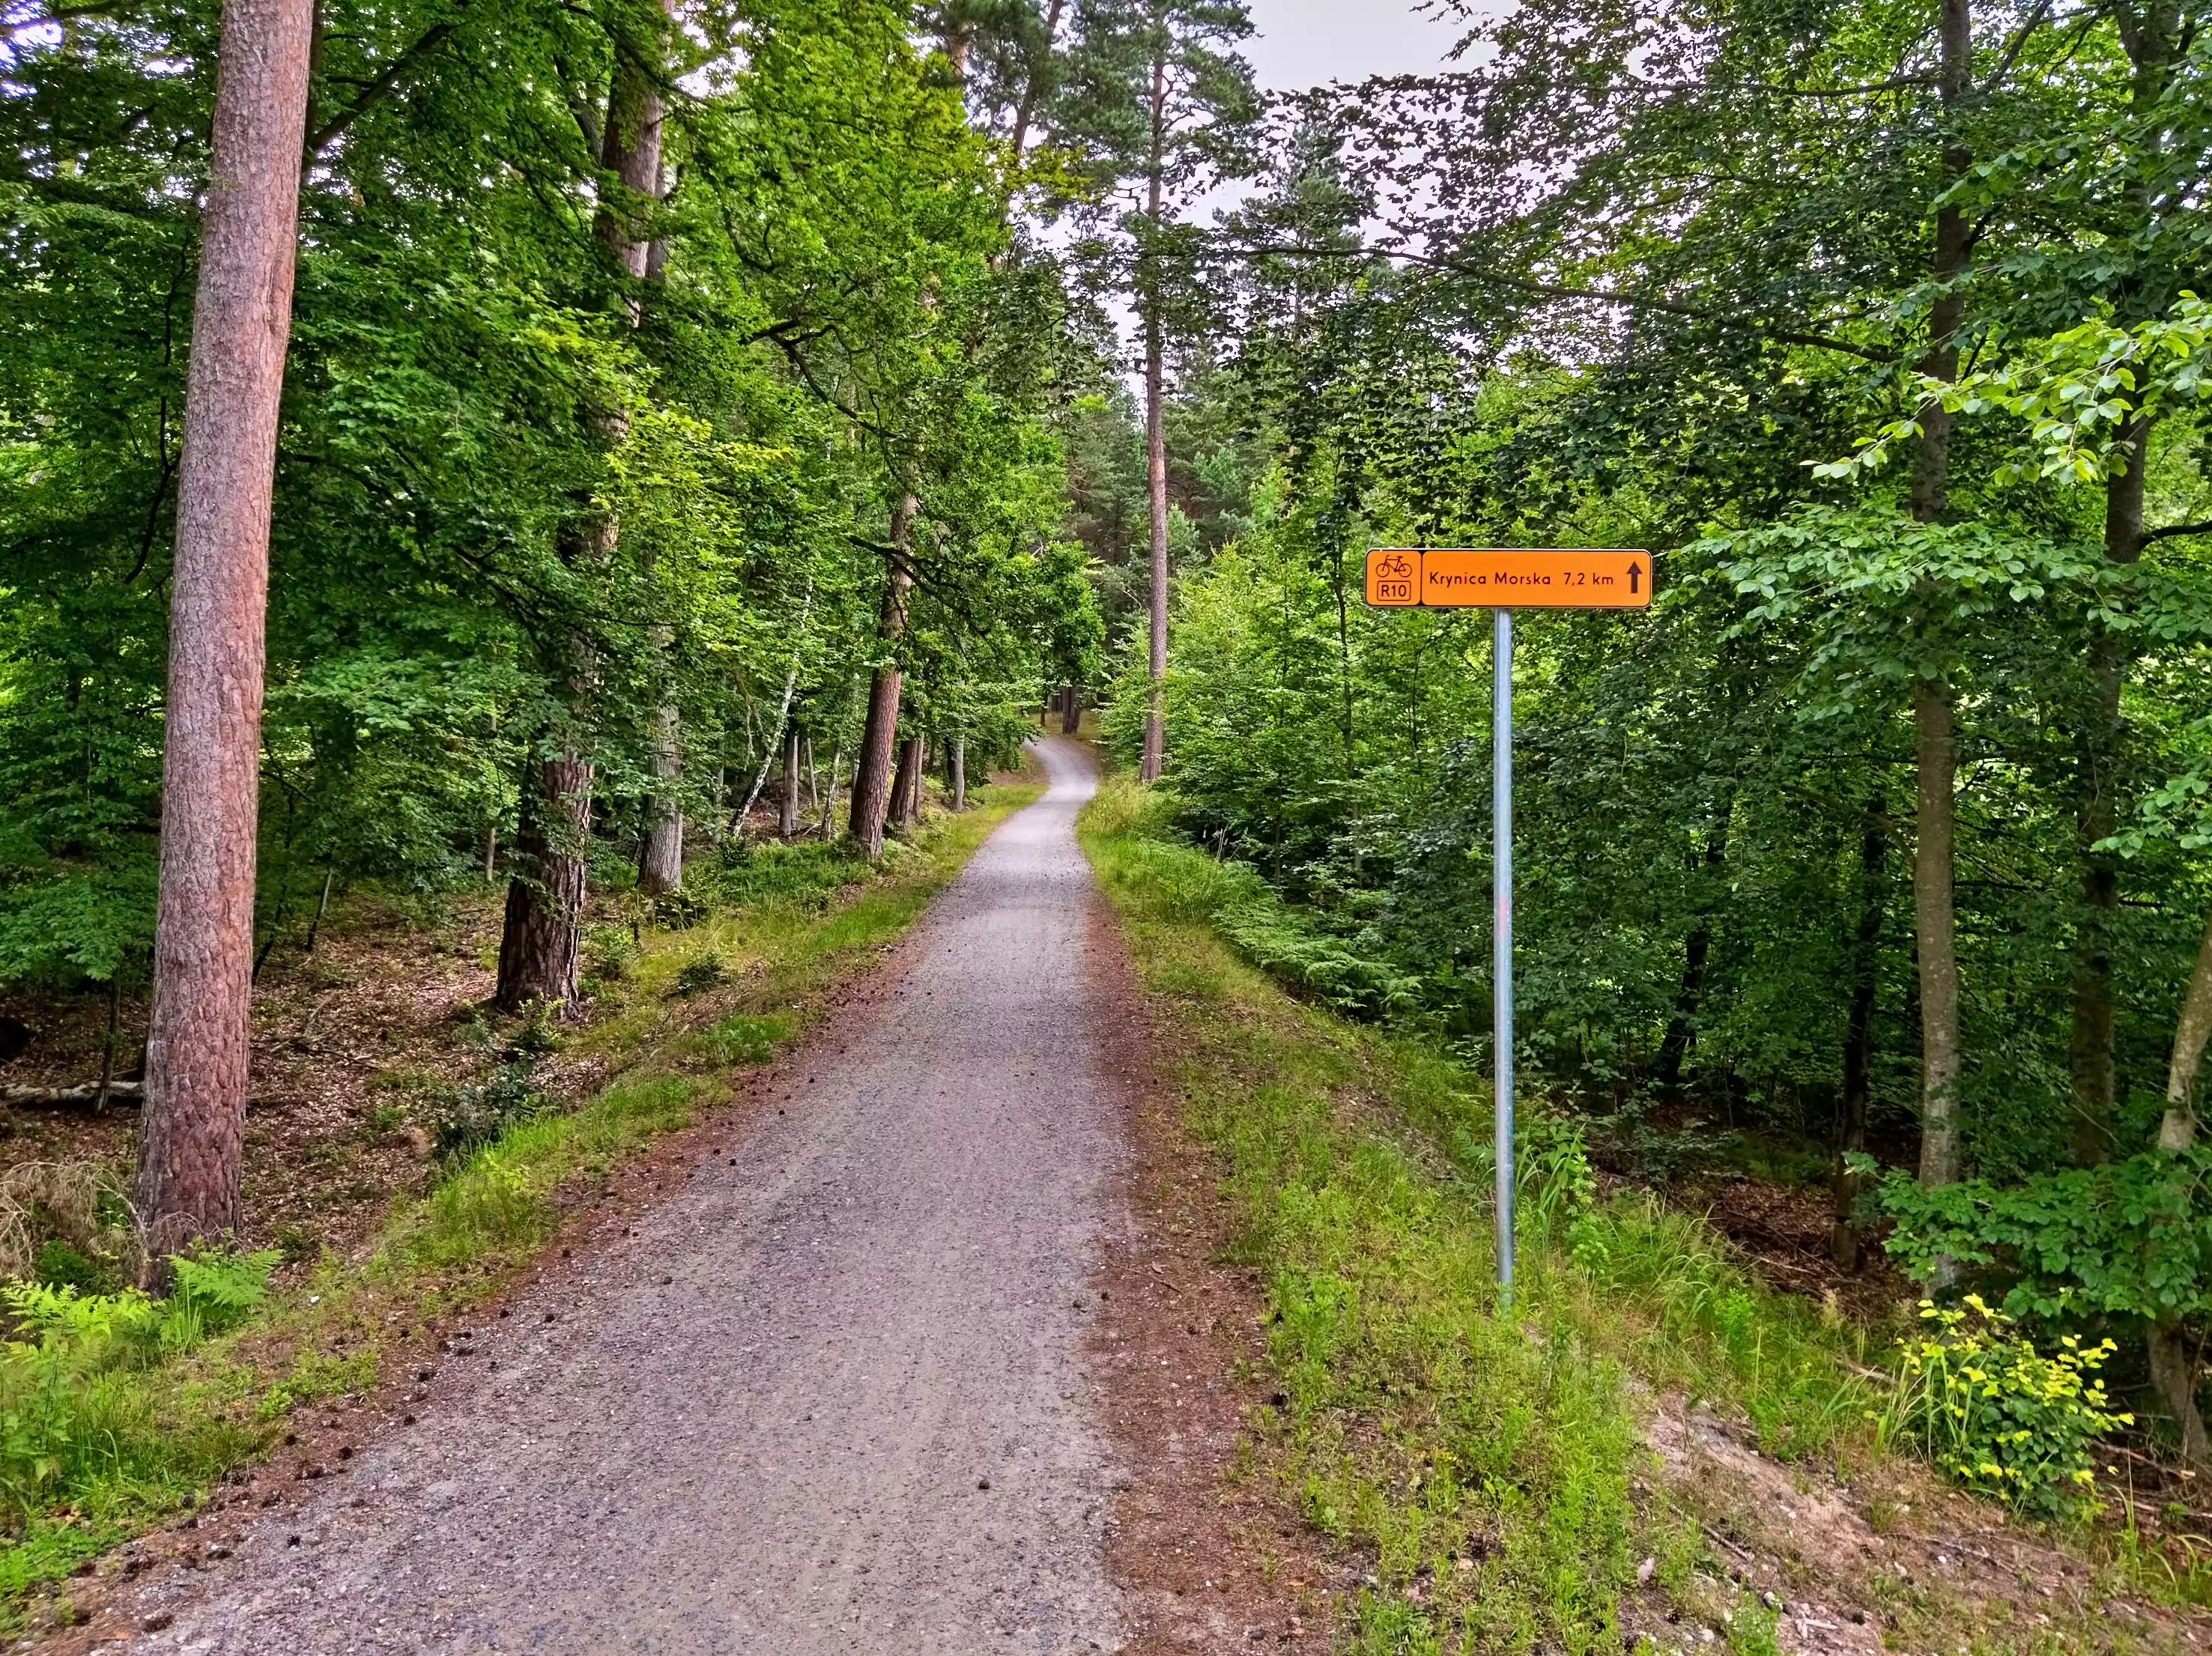 A yellow road sign above a gravel pathway in a forest